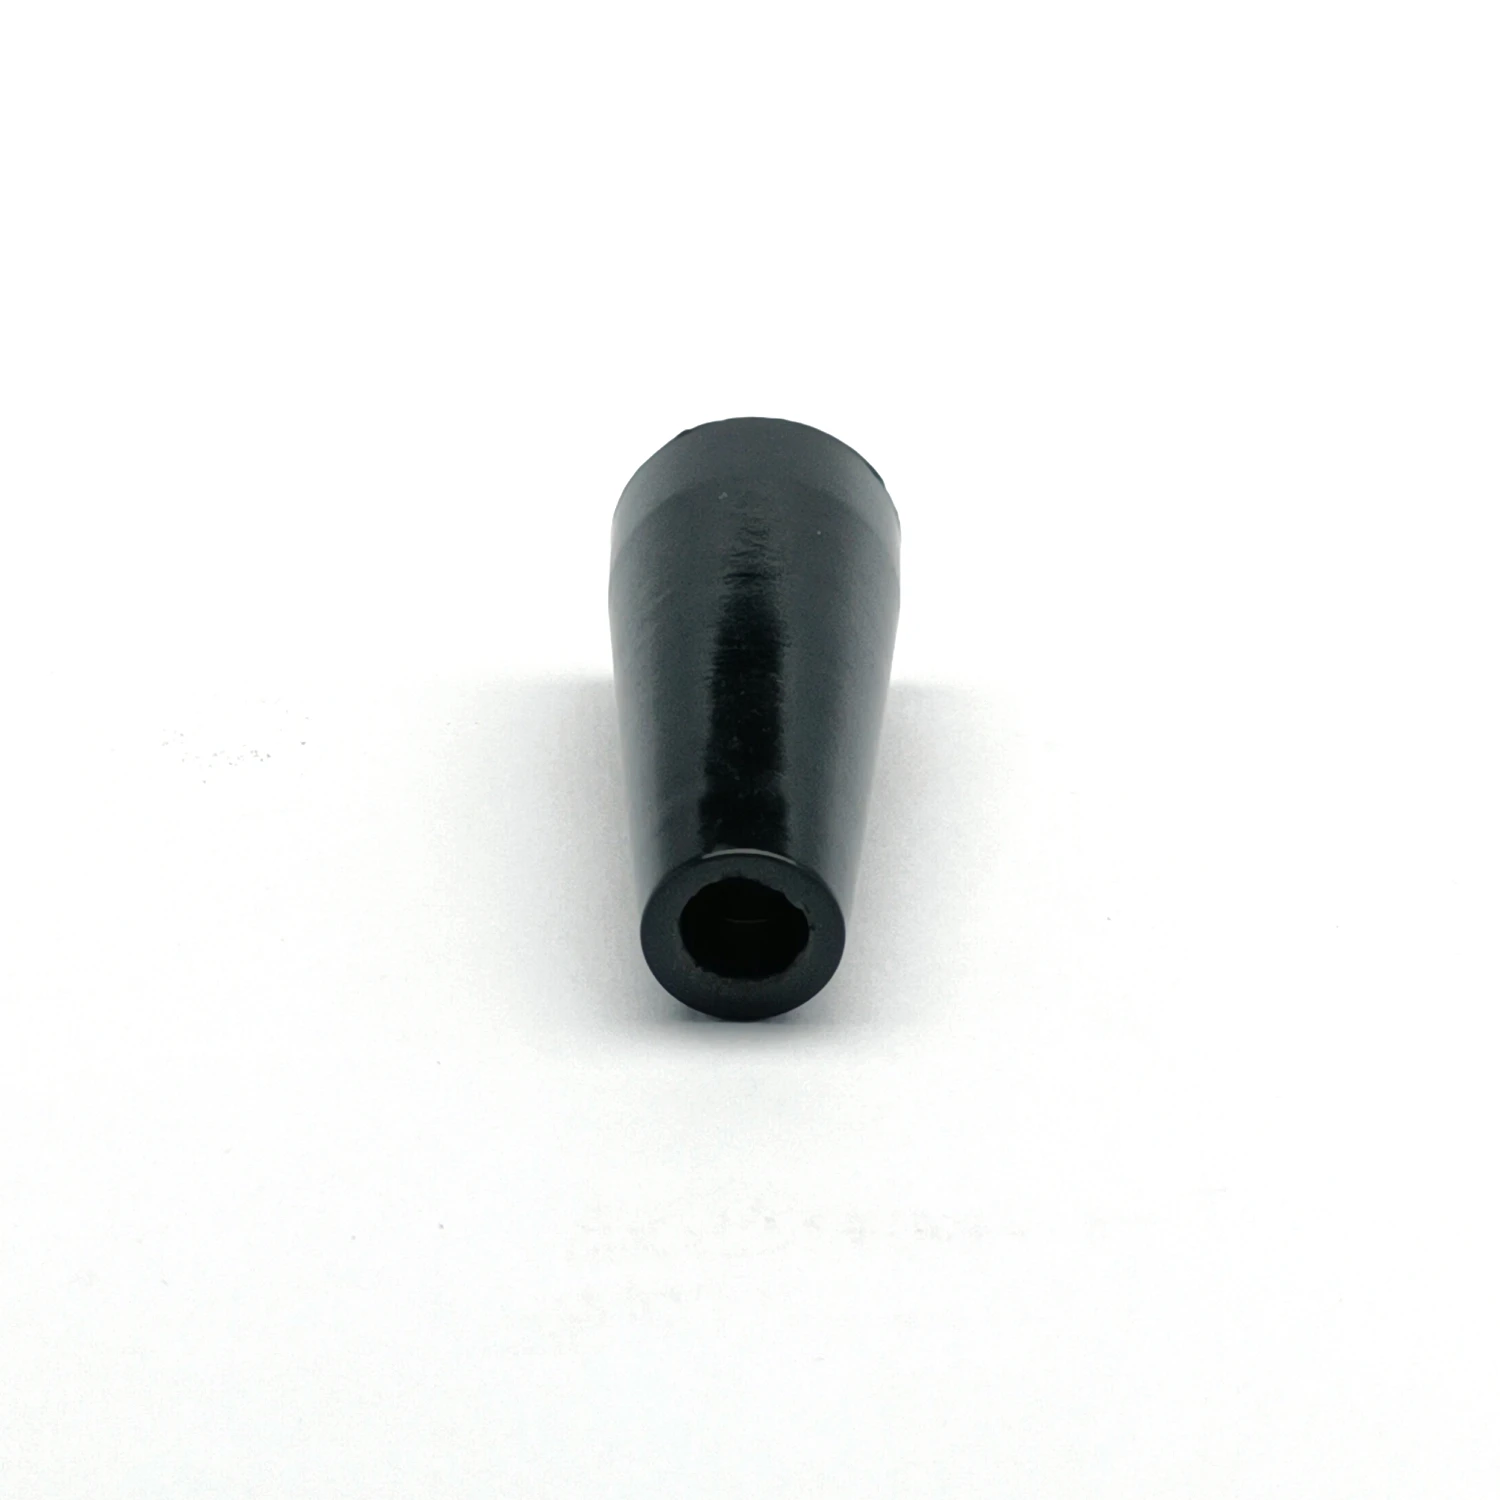 0.6/0.8/0.9/1.0 MIG MAG Gasless Flux Cored Welding Torch Gun Contact Tip Nozzle Shield Holder Gas Diffuser